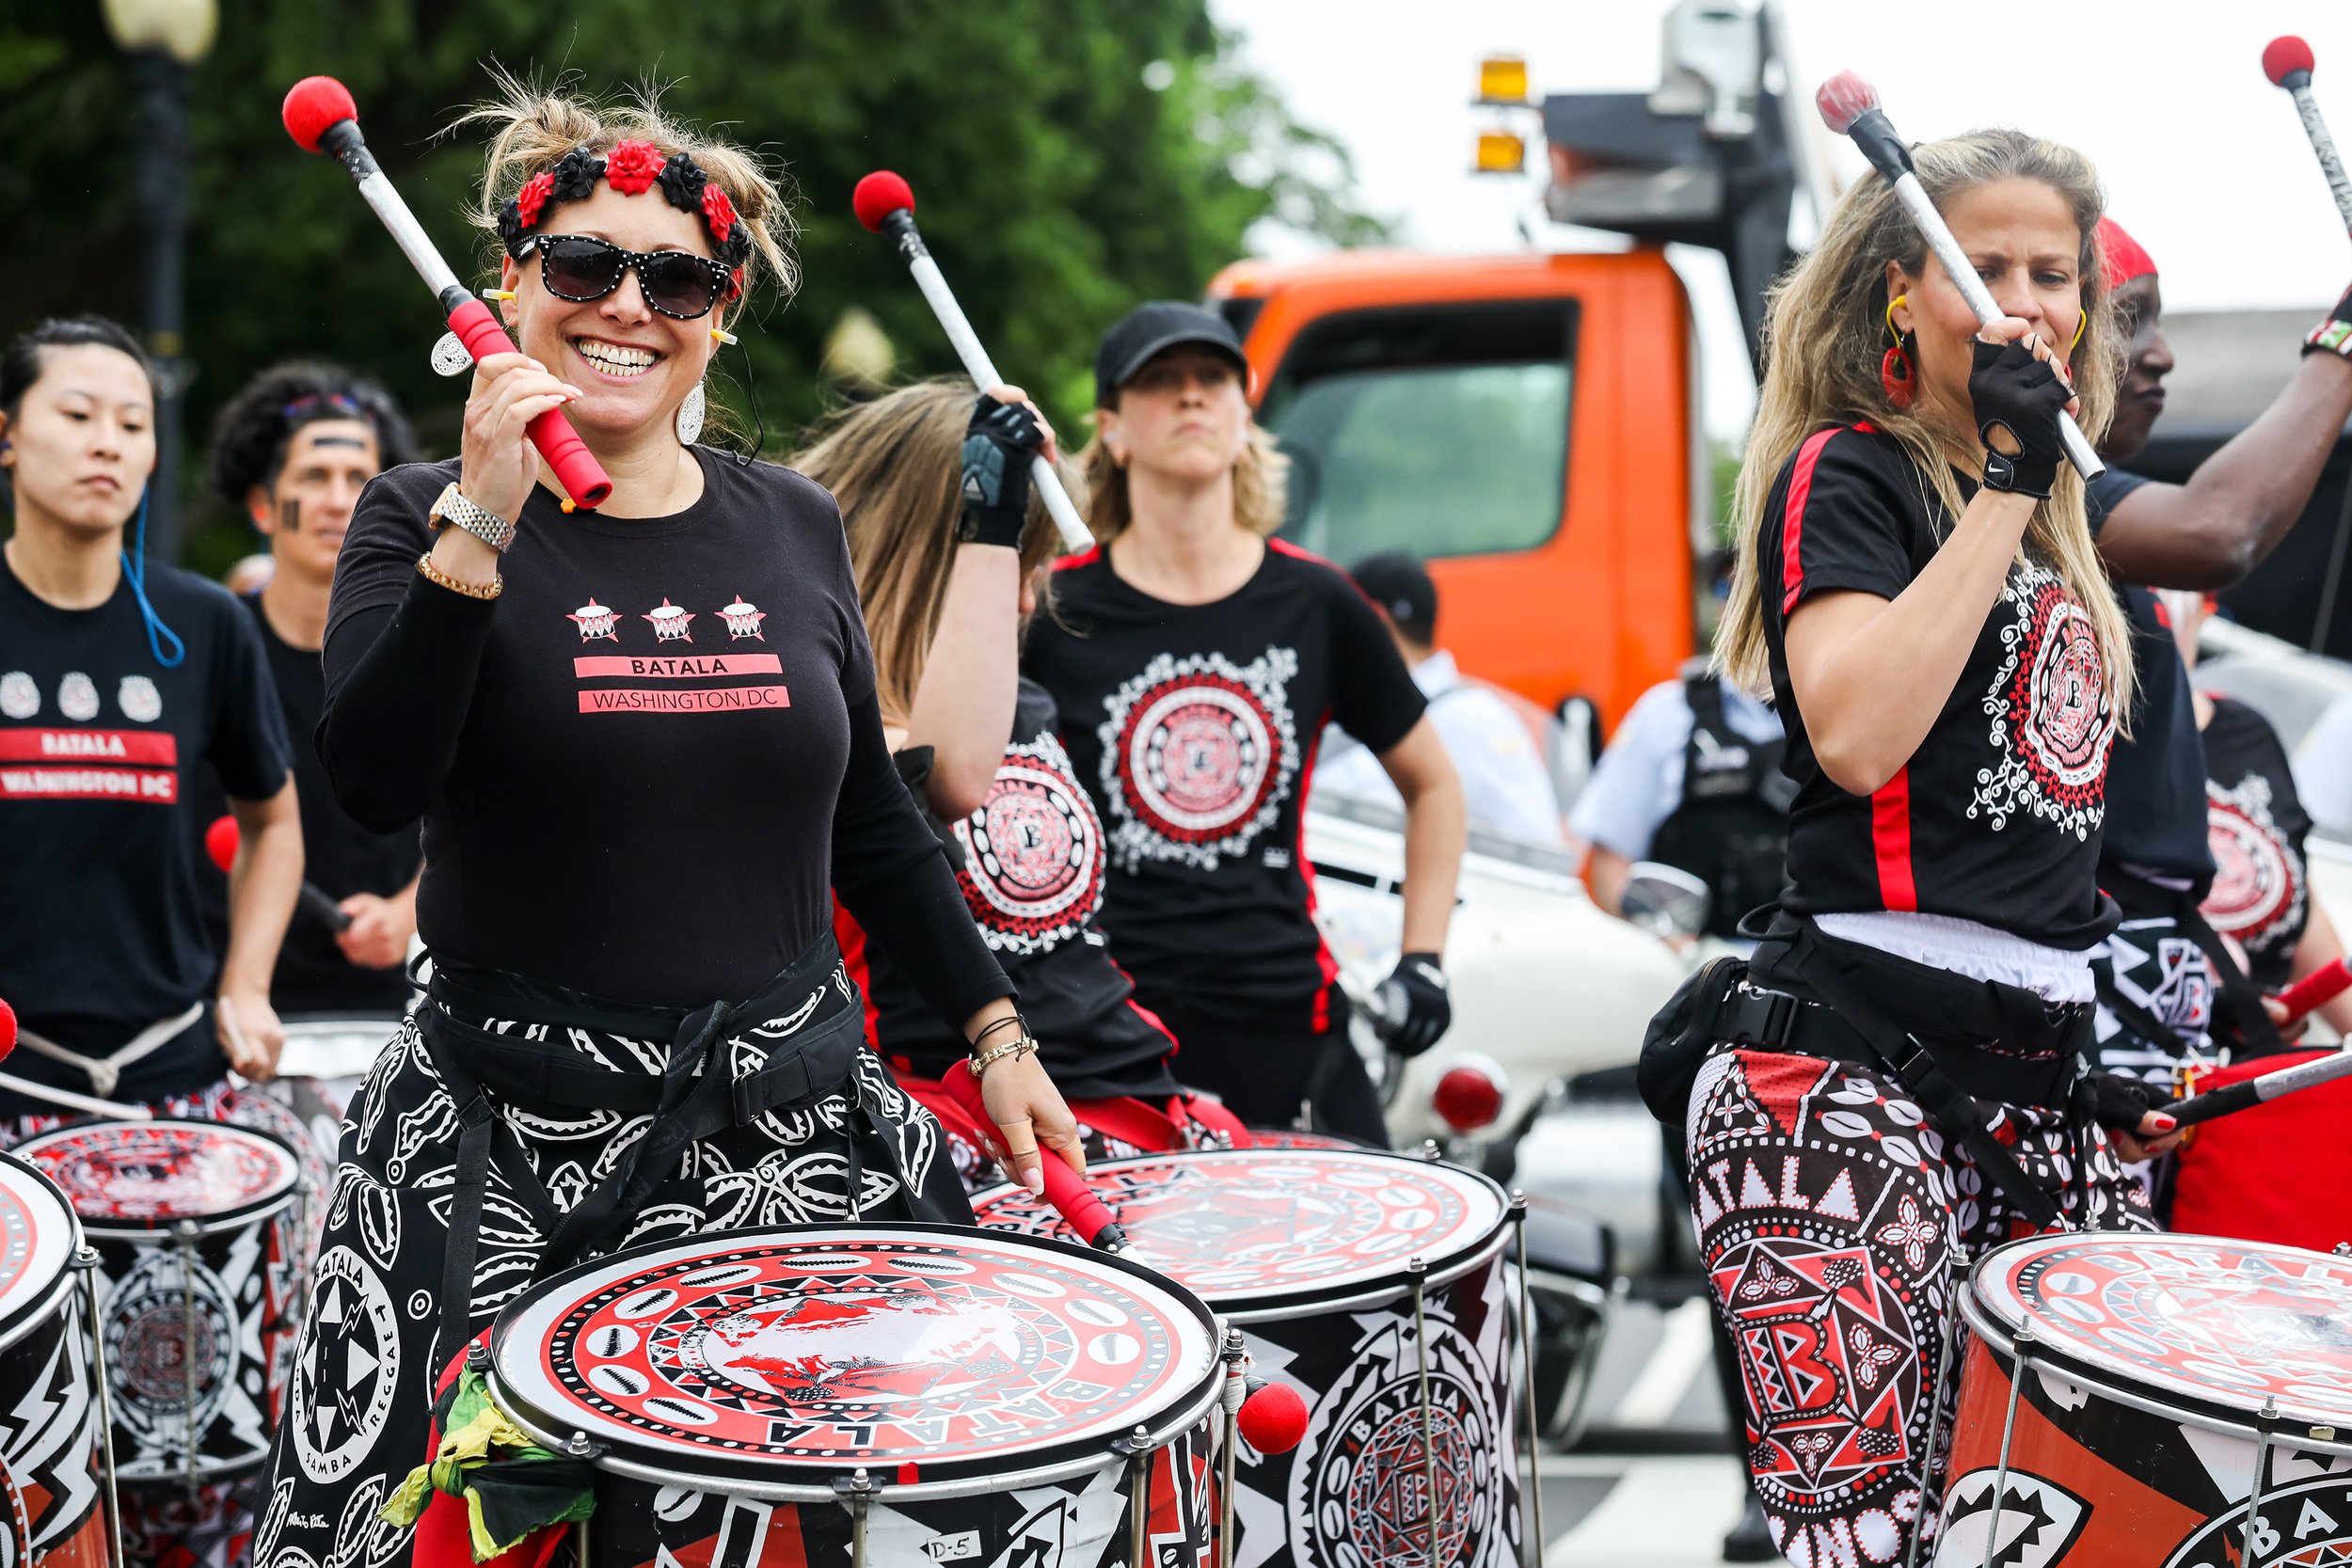  Members of the Batalá Percussion Band pound the drums at the start of an abortion rights march in Washington DC on Saturday, May 14, 2022. 